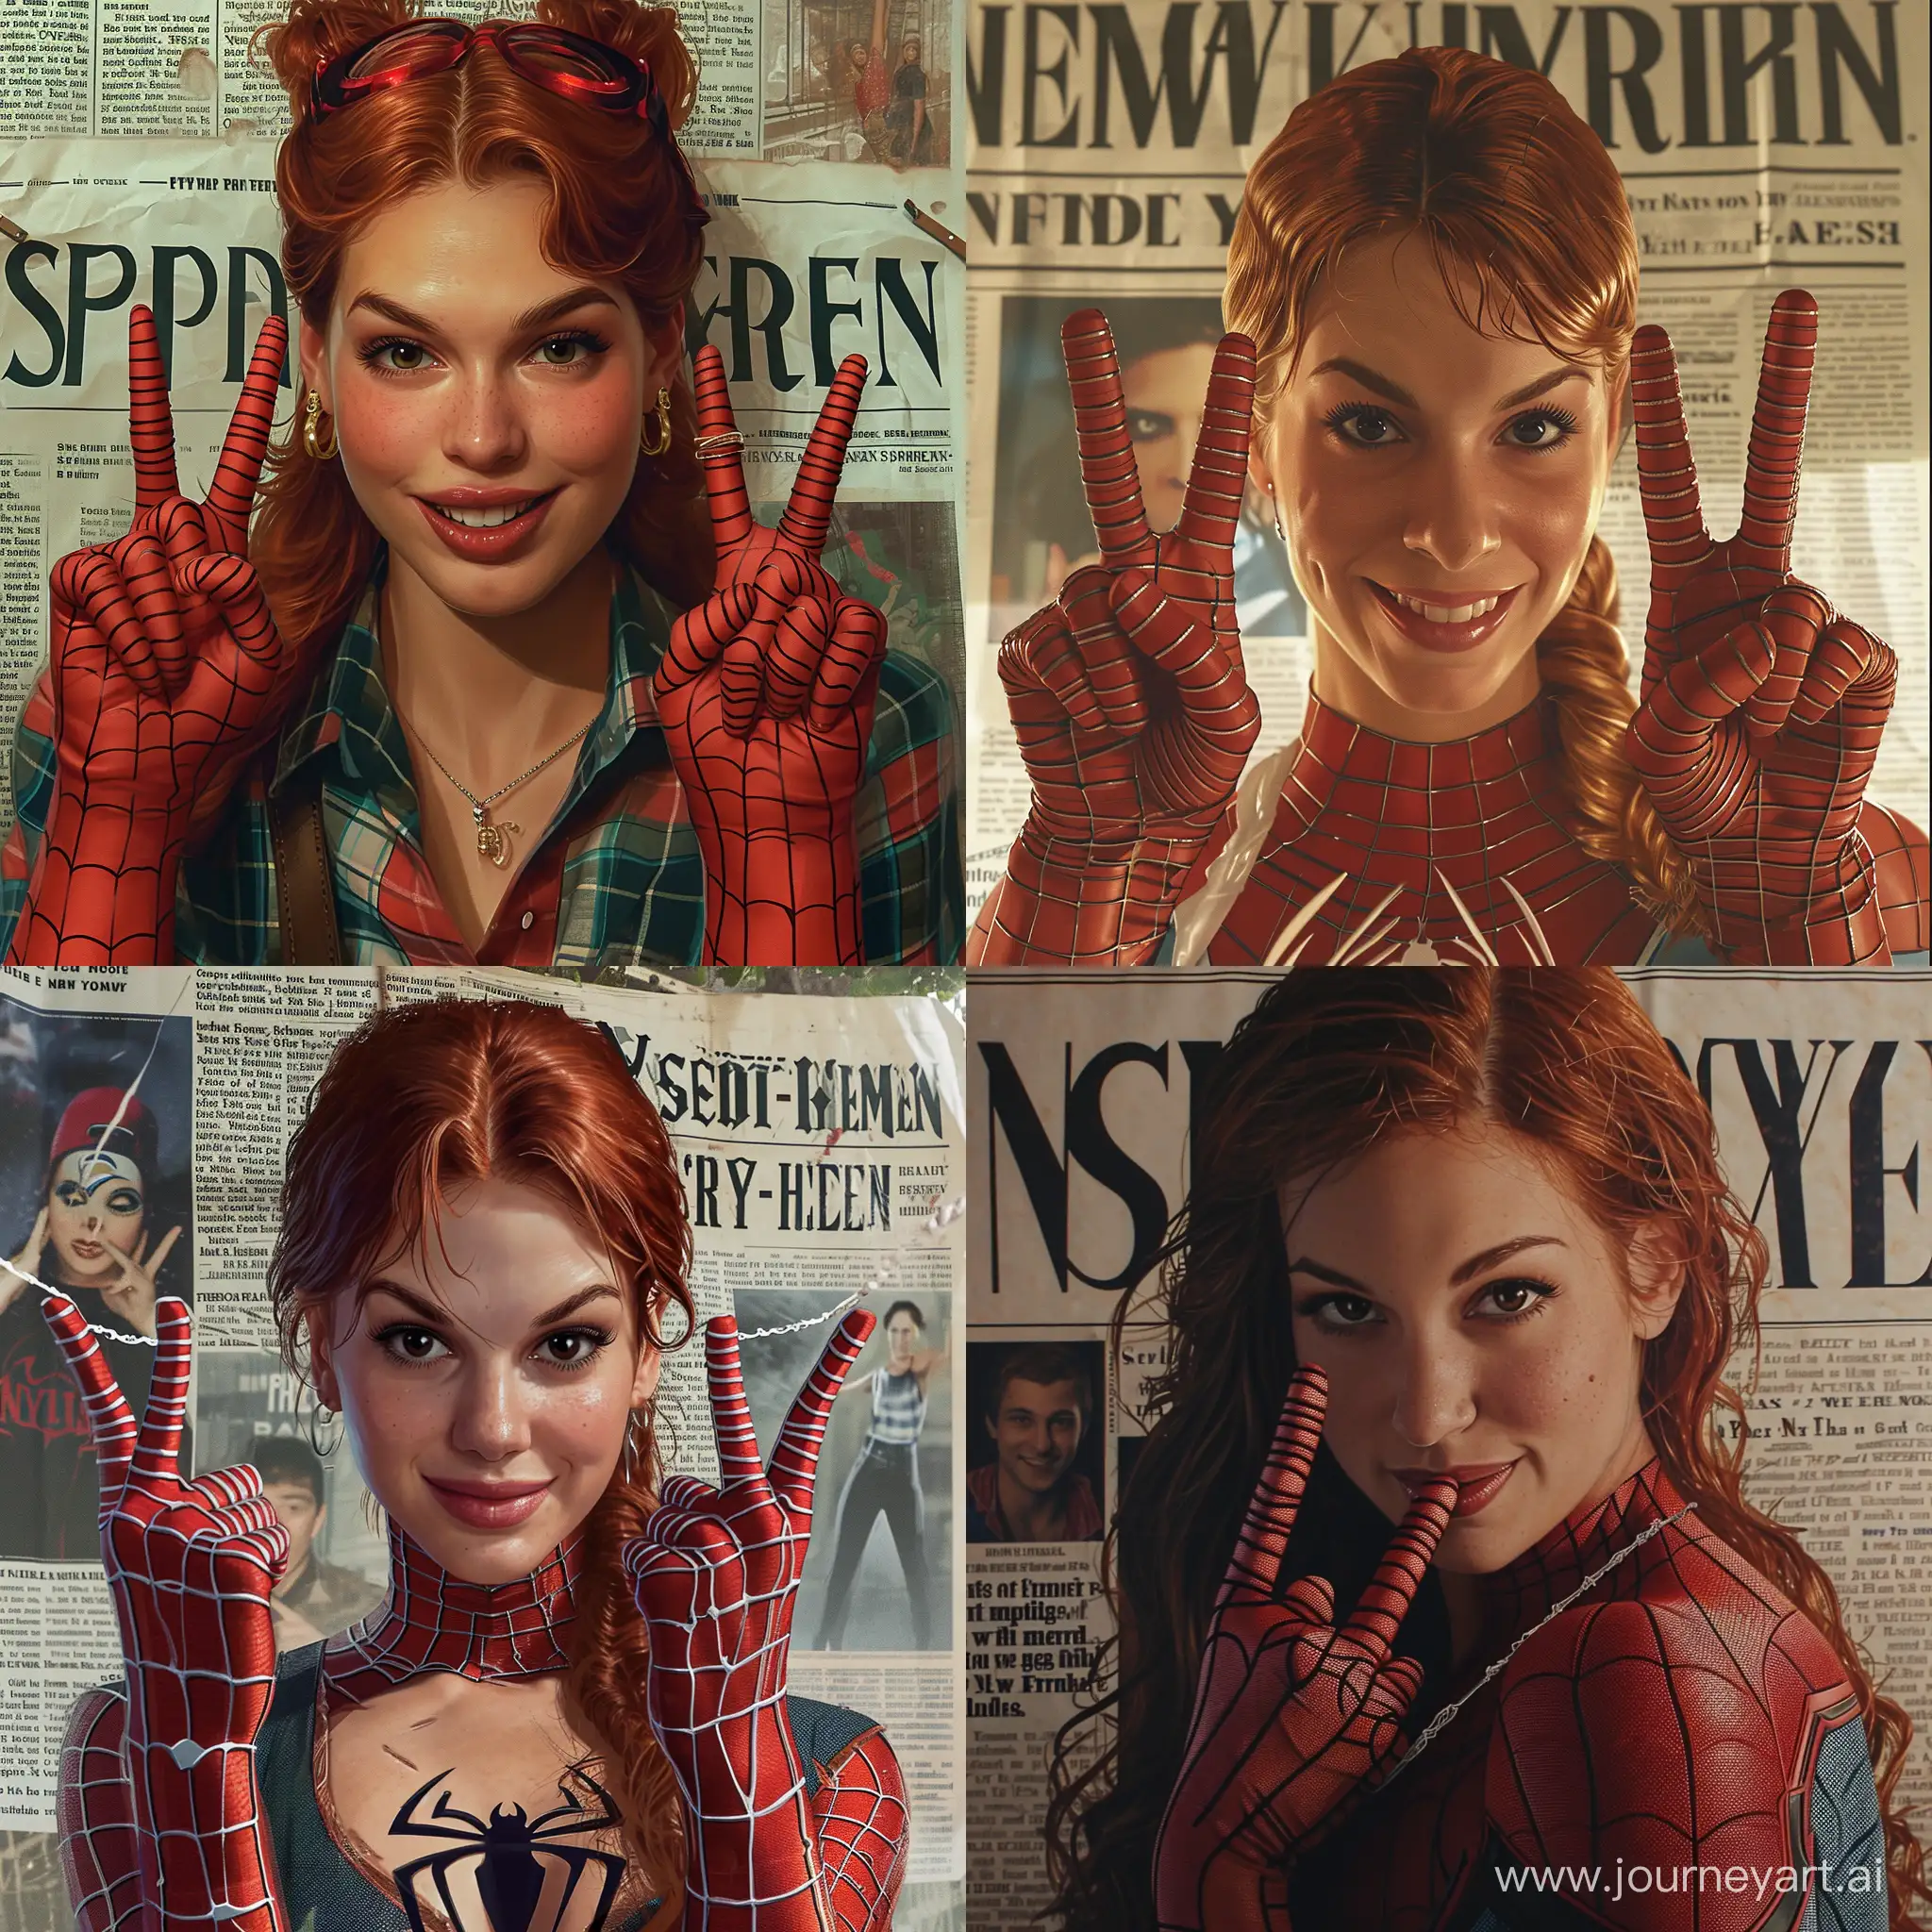 Hyperrealistic Mary Jane from Spider-Man shows two fingers with a sly grin in a Spider-Man costume against the background of the New York Times
